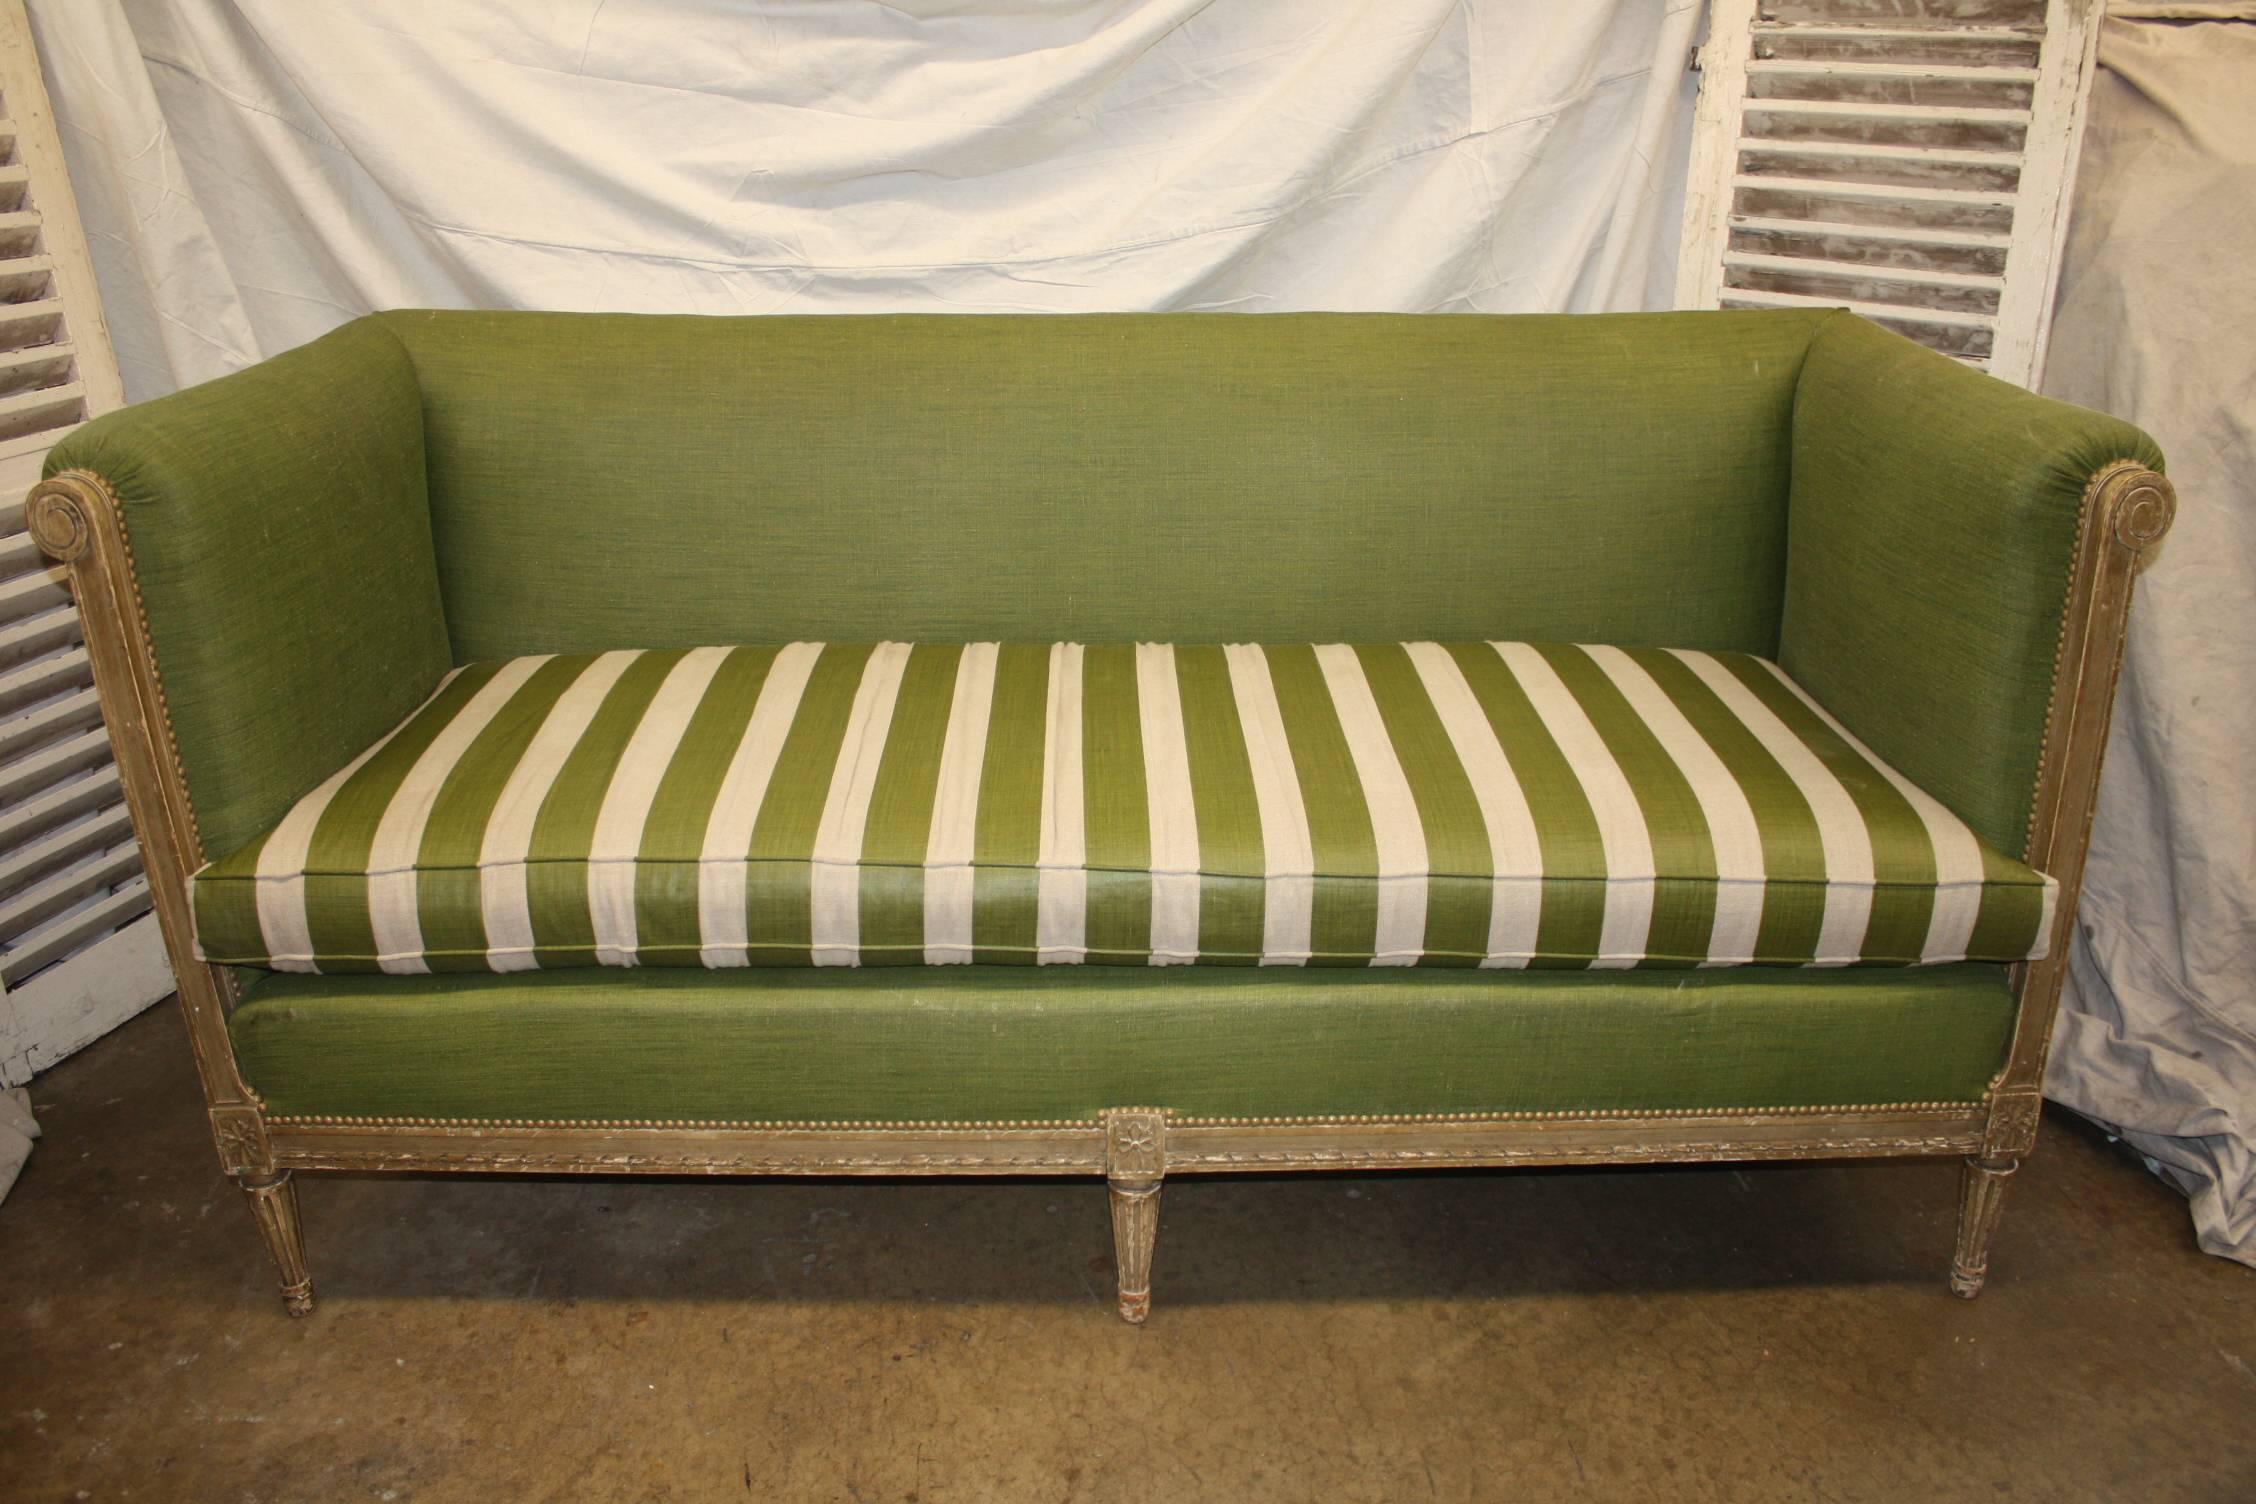 Early 19th century French sofa in Louis XVI style.